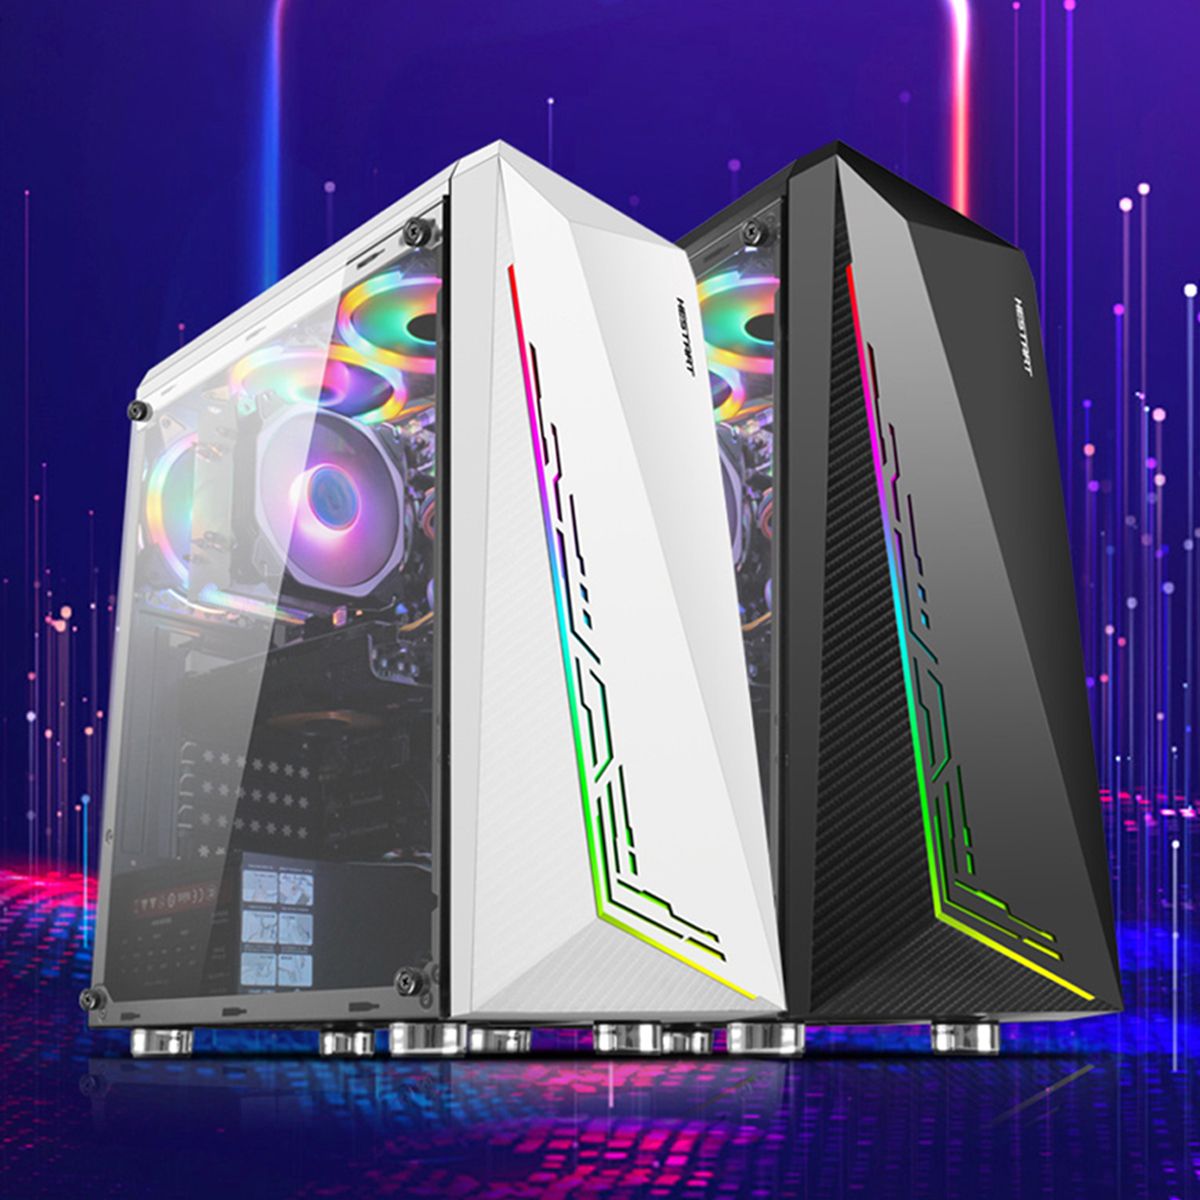 RGB-PC-Gaming-Case-RGB-Light-Transparen-Acrylic-Side-Computer-Case-Tower-Chassis-Support-ATXMATXITX--1703347